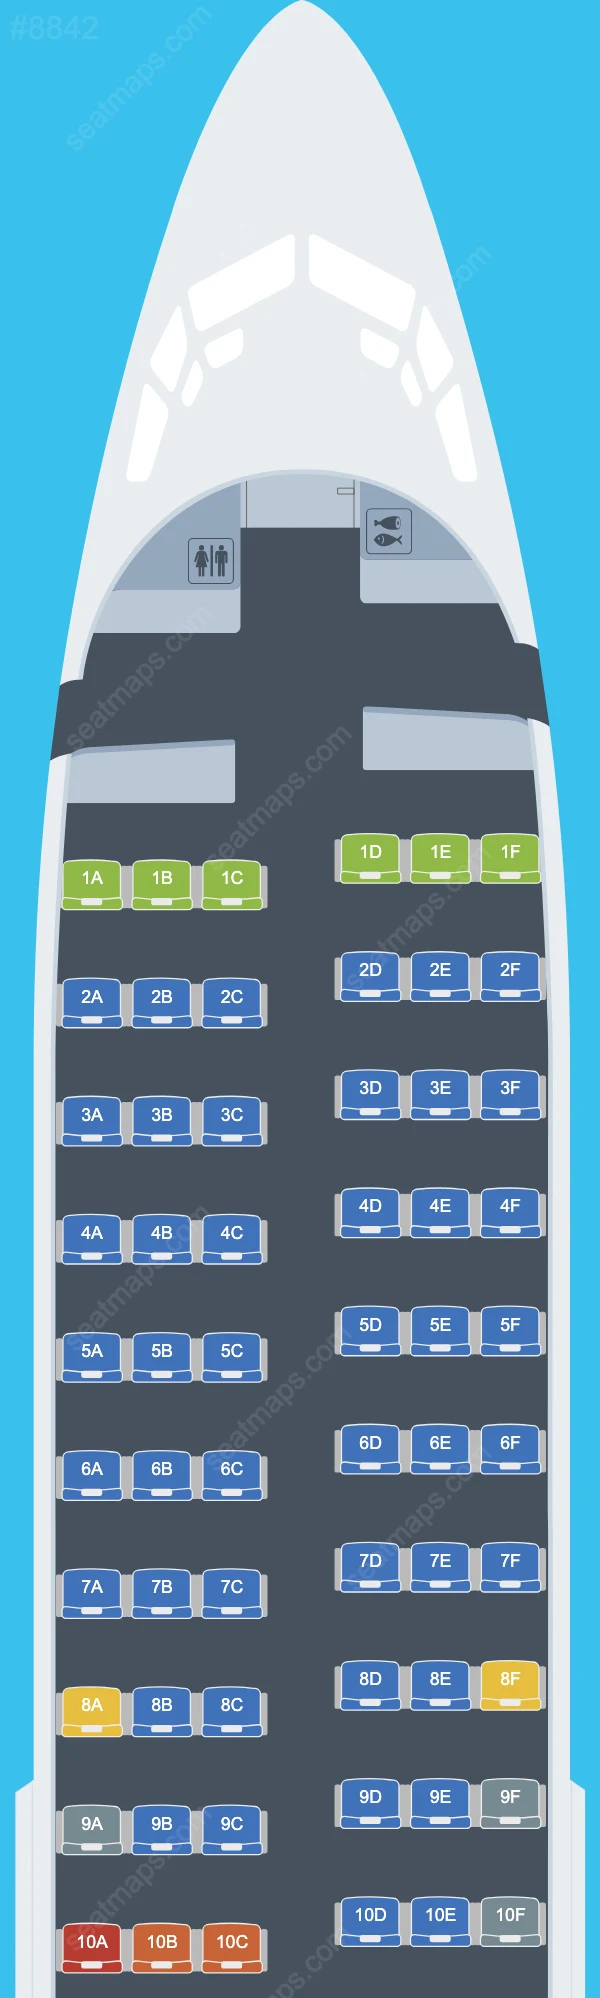 Star Perú Boeing 737-300 seatmap mobile preview